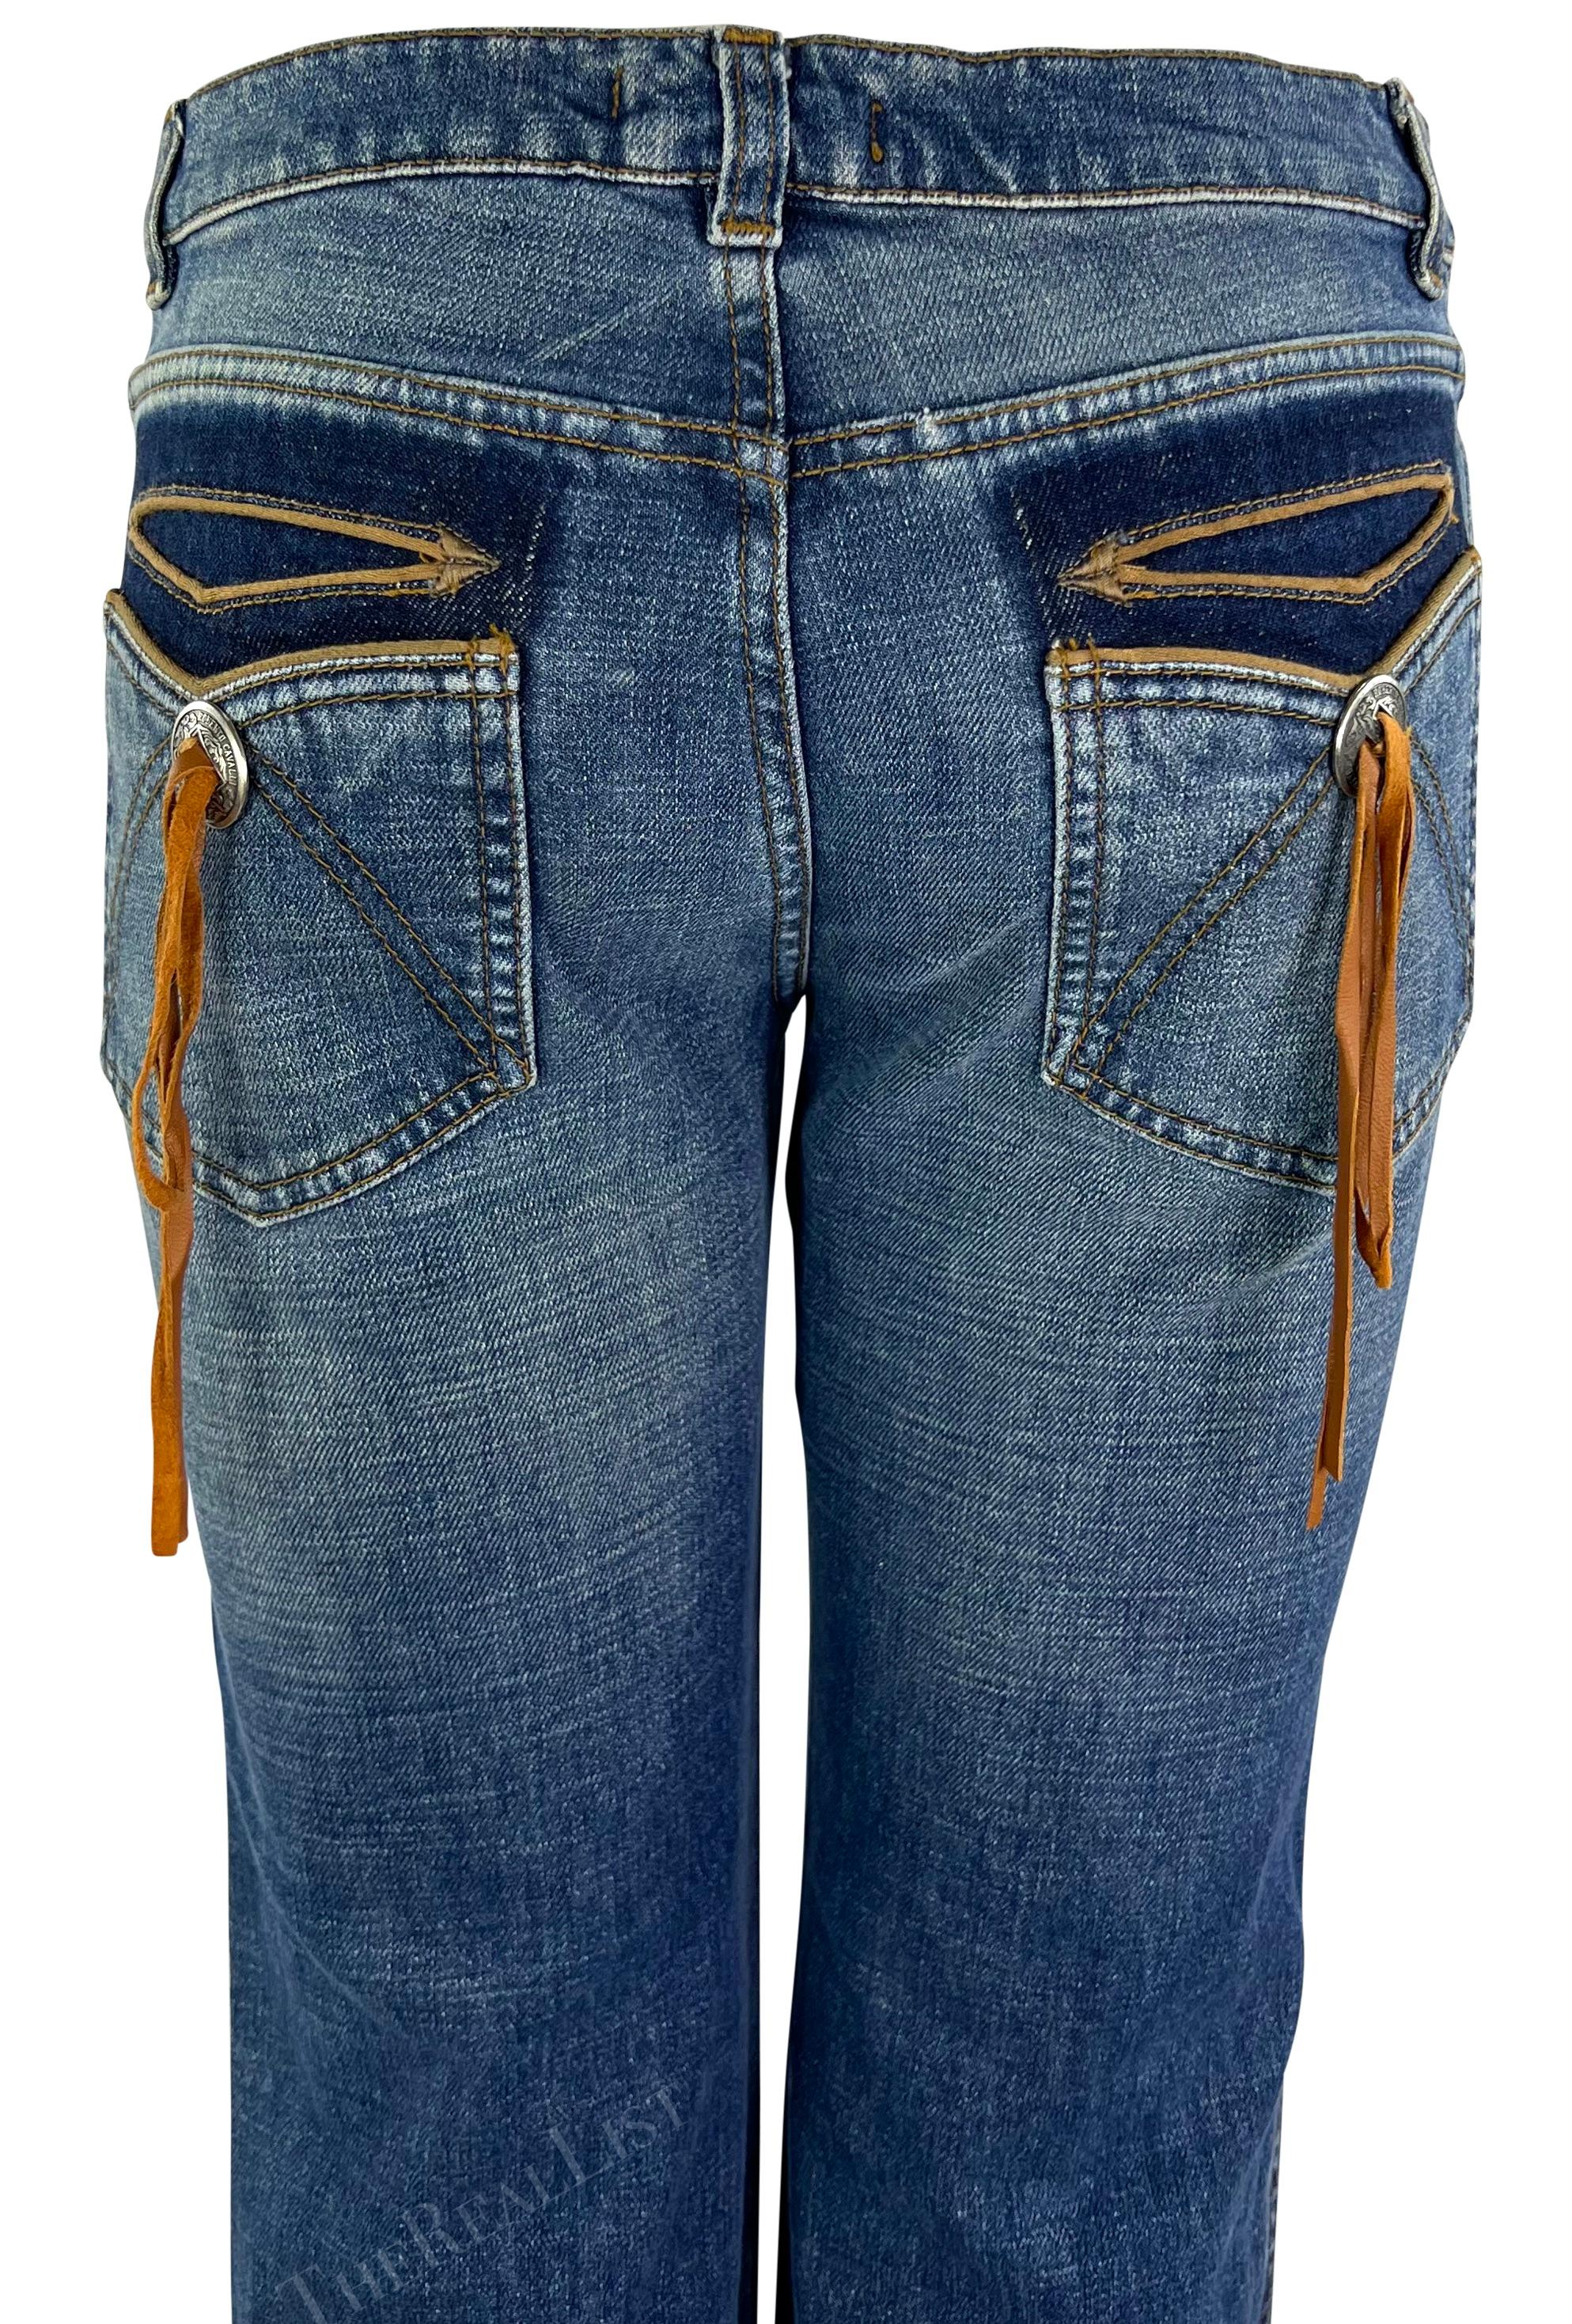 Presenting a pair of light-wash Roberto Cavalli jeans. From 2003, these lightly flared jeans are adorned with a silver-tone metal button and suede fringe at the rear pockets. These American West-inspired Robert Cavalli jeans are made complete with